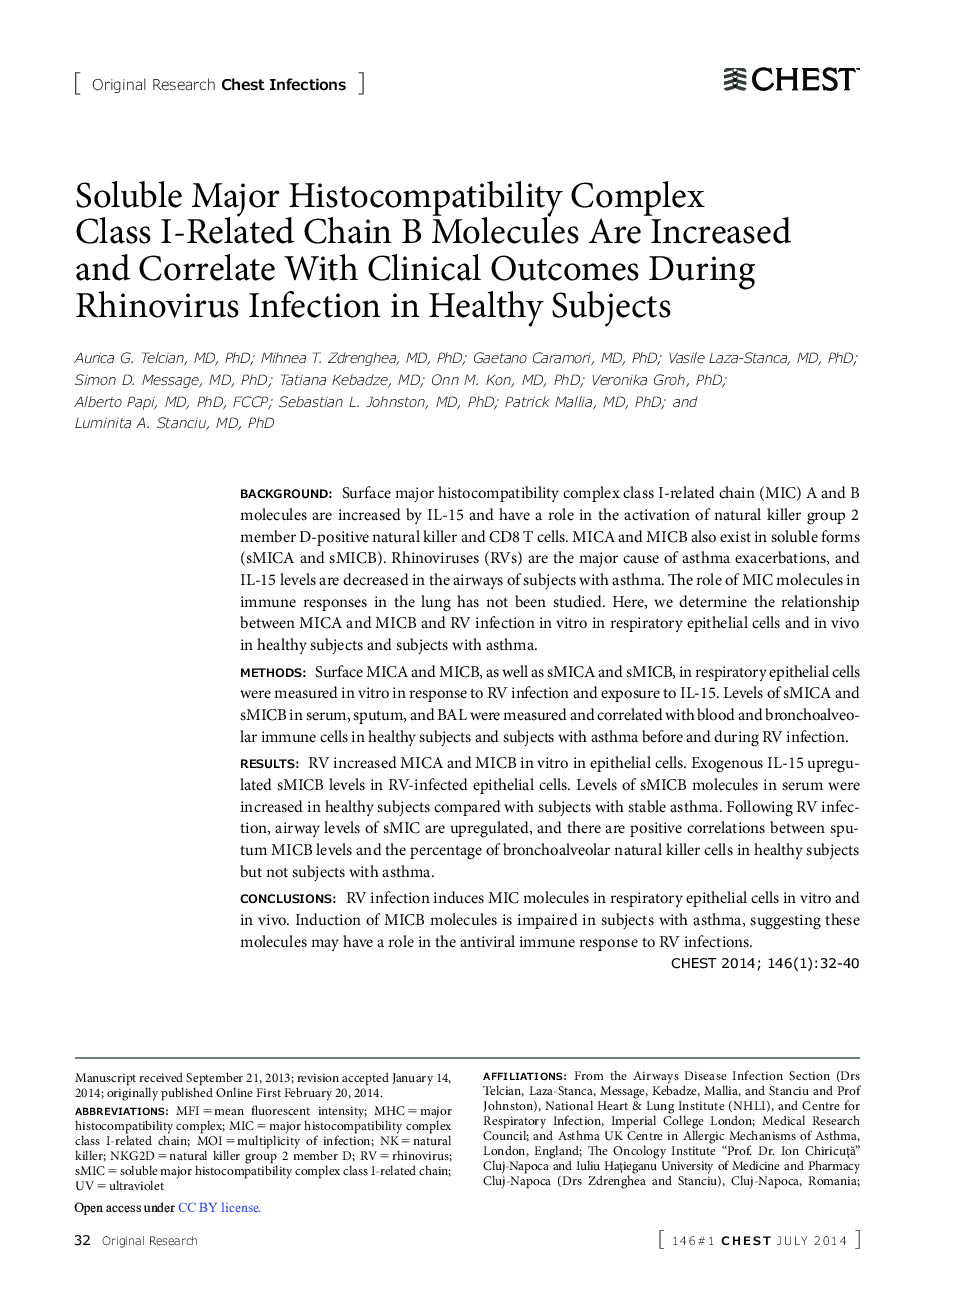 Soluble Major Histocompatibility Complex Class I-Related Chain B Molecules Are Increased and Correlate With Clinical Outcomes During Rhinovirus Infection in Healthy Subjects